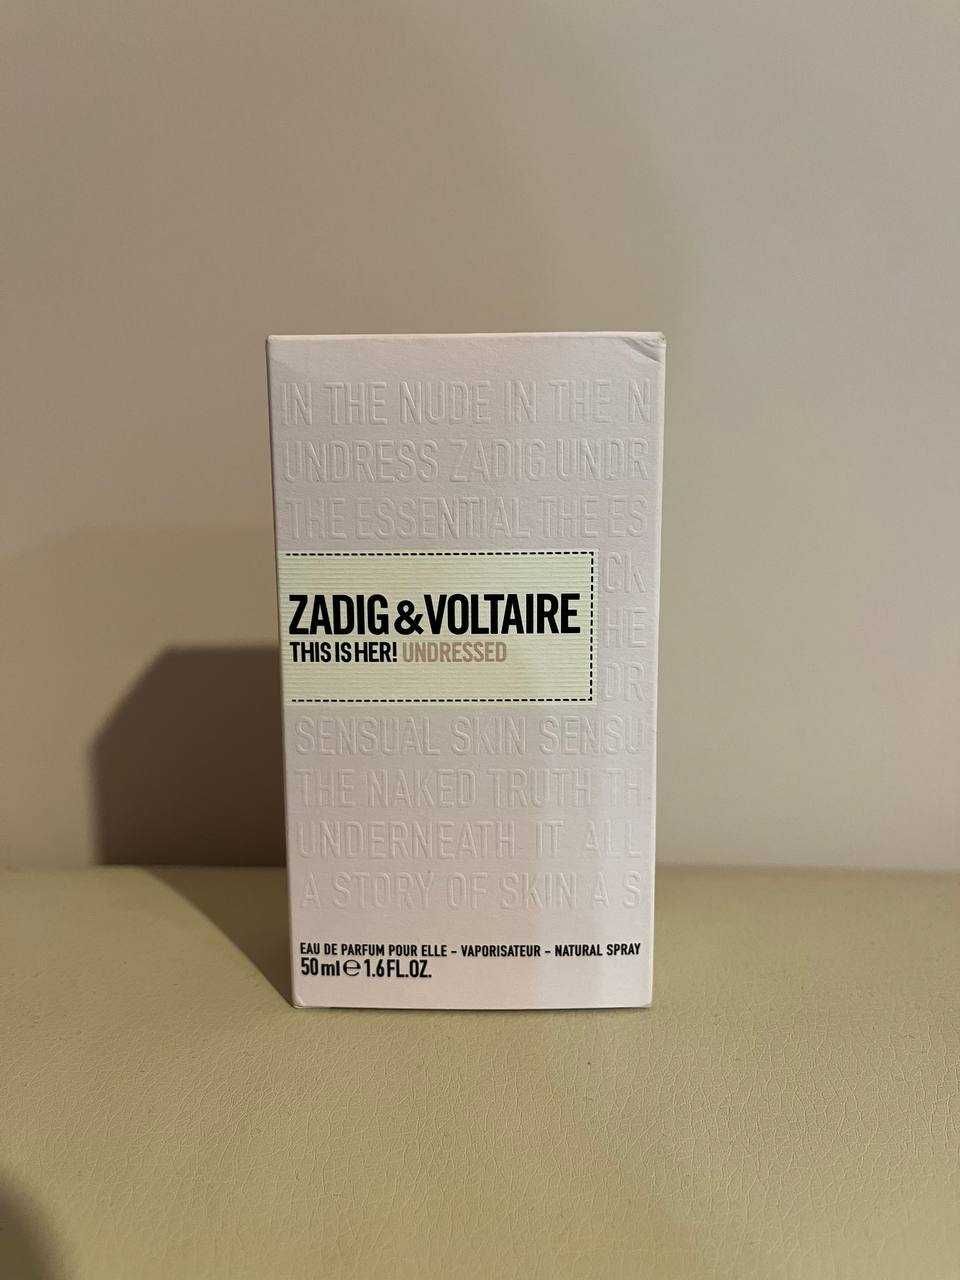 Zadig & Voltaire: This Is Her Undressed 50ml.